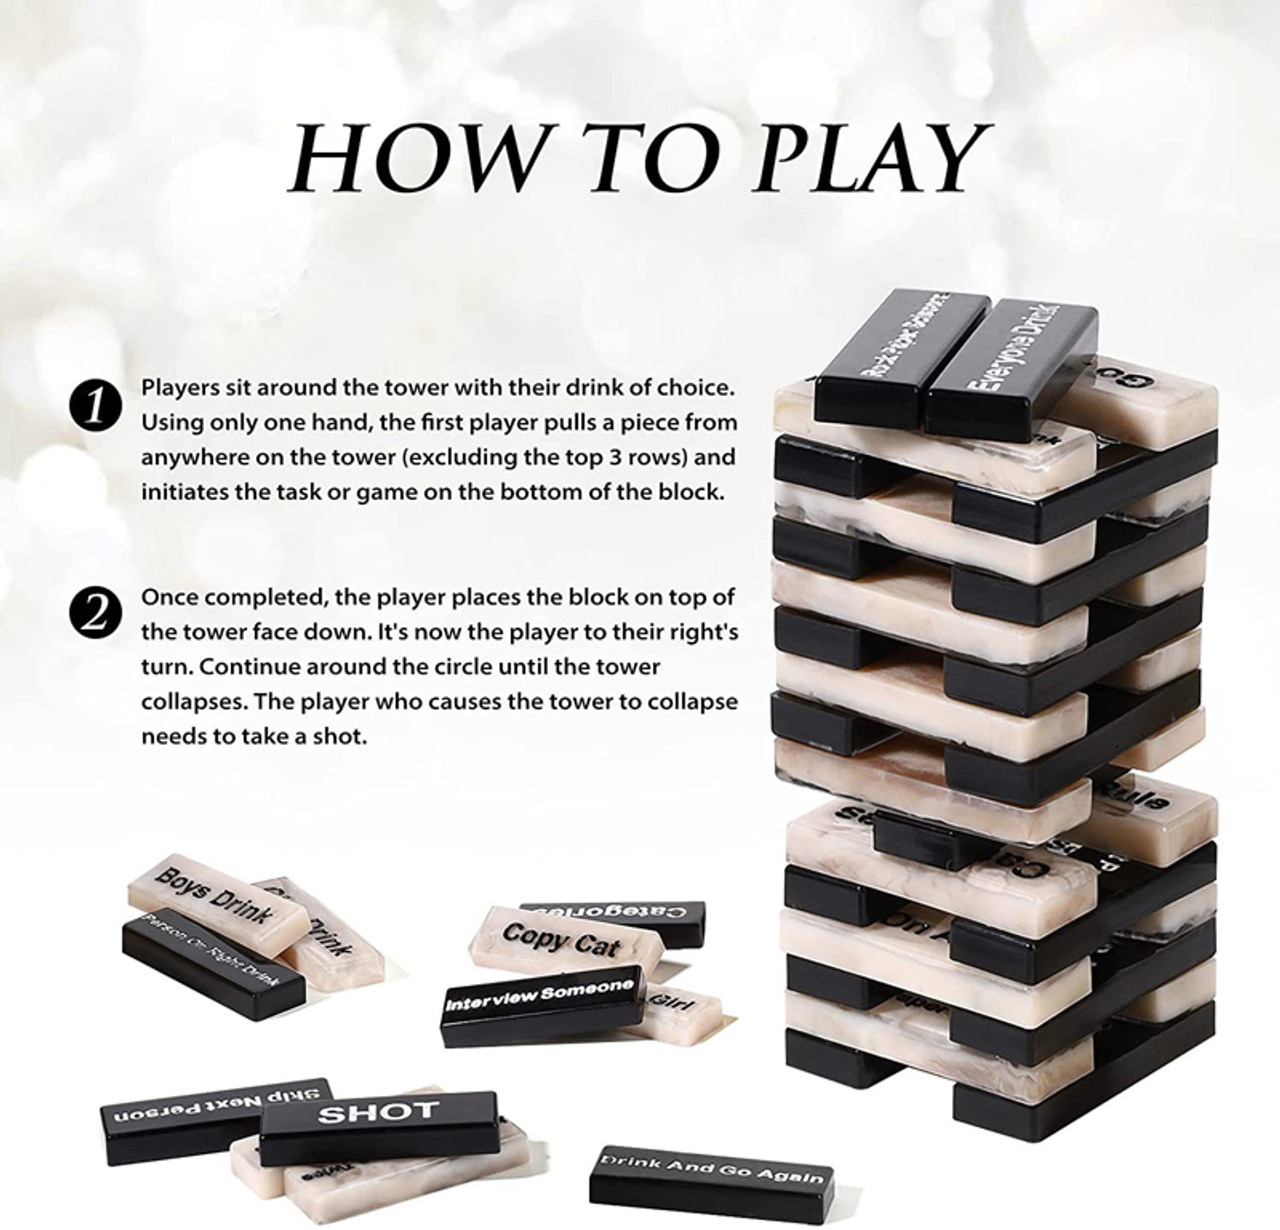 Tumbling Blocks Game, Luxury Home Accessories & Gifts